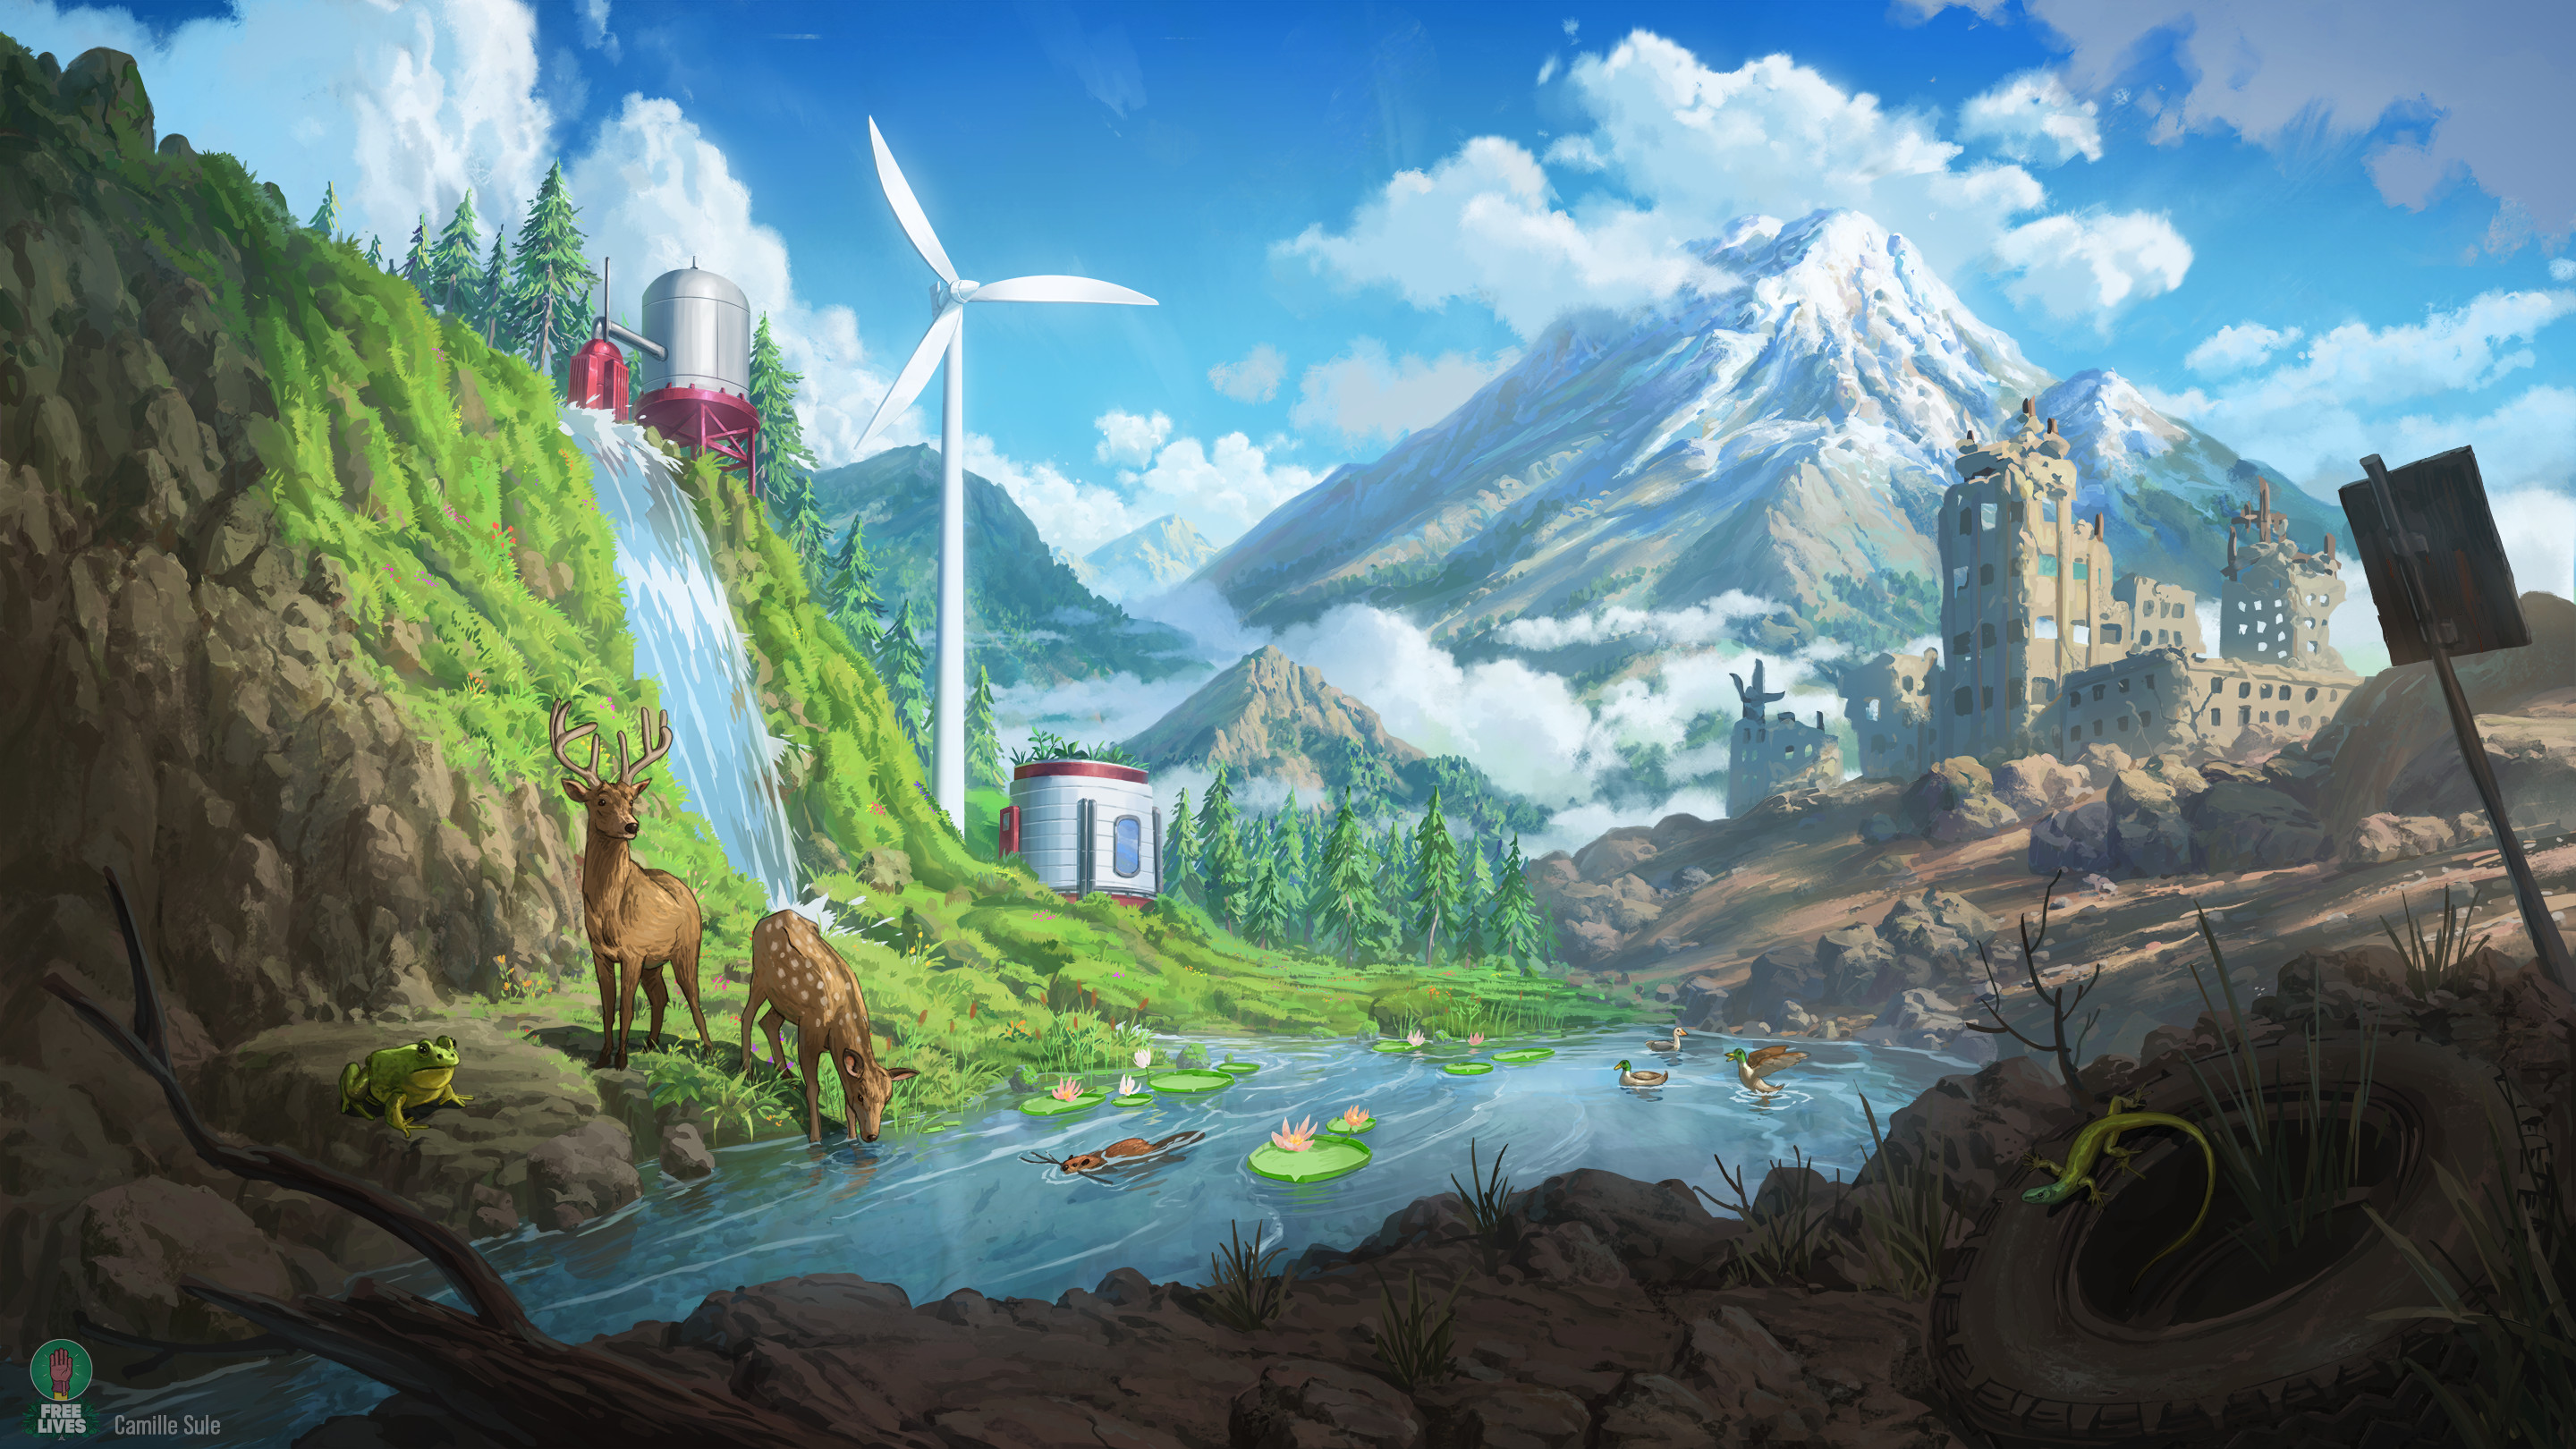 Video Game Terra Nil HD Wallpaper by Camille Sule